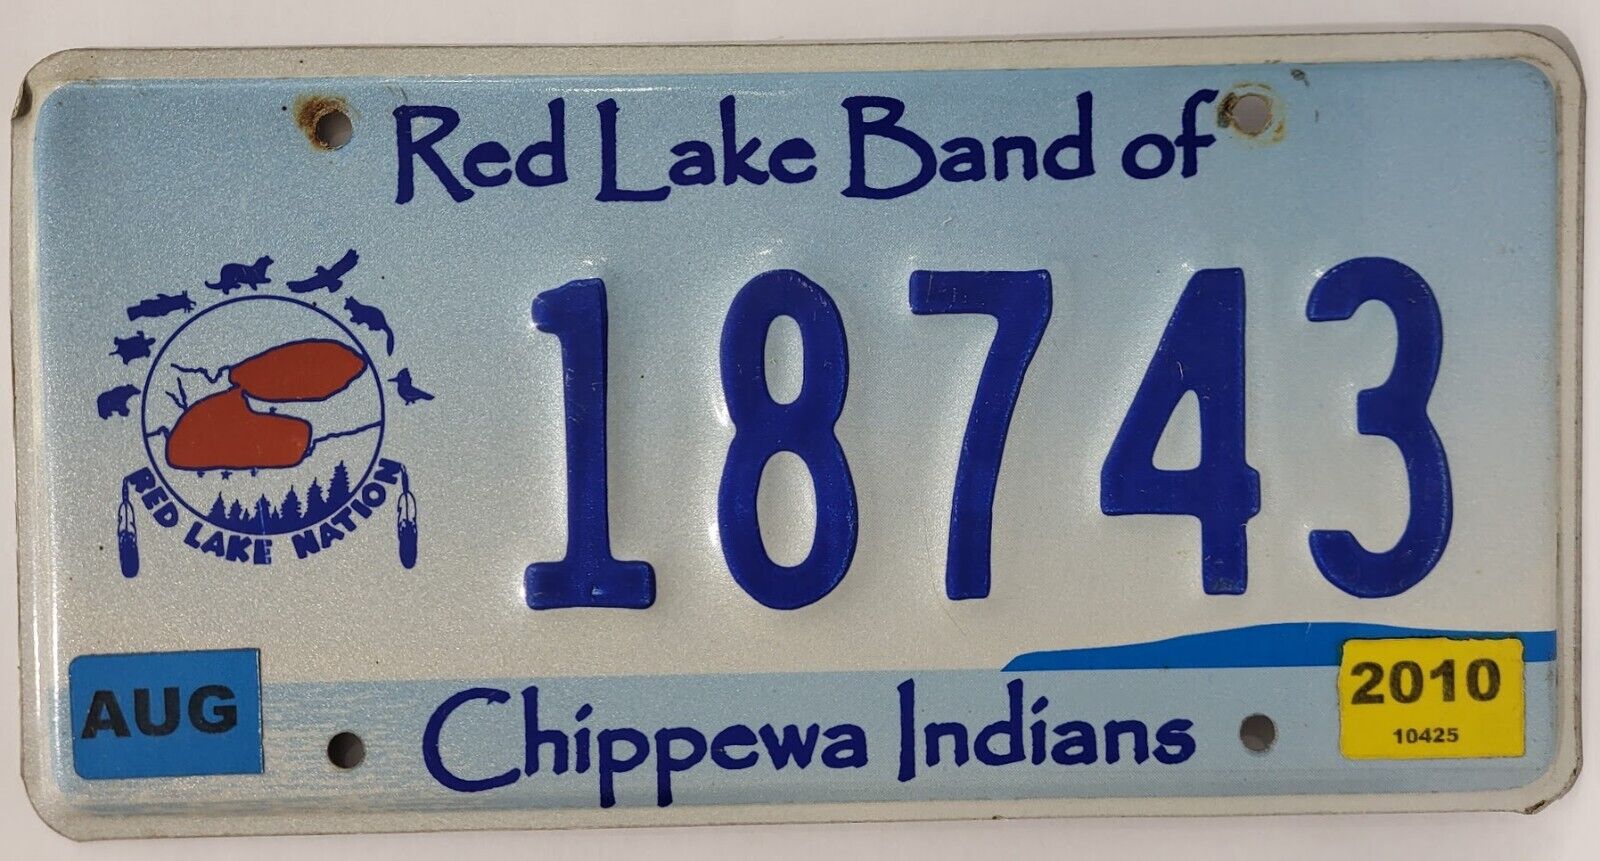 2010 Minnesota Red Lake Nation Band of the Chippewa Indians License Plate